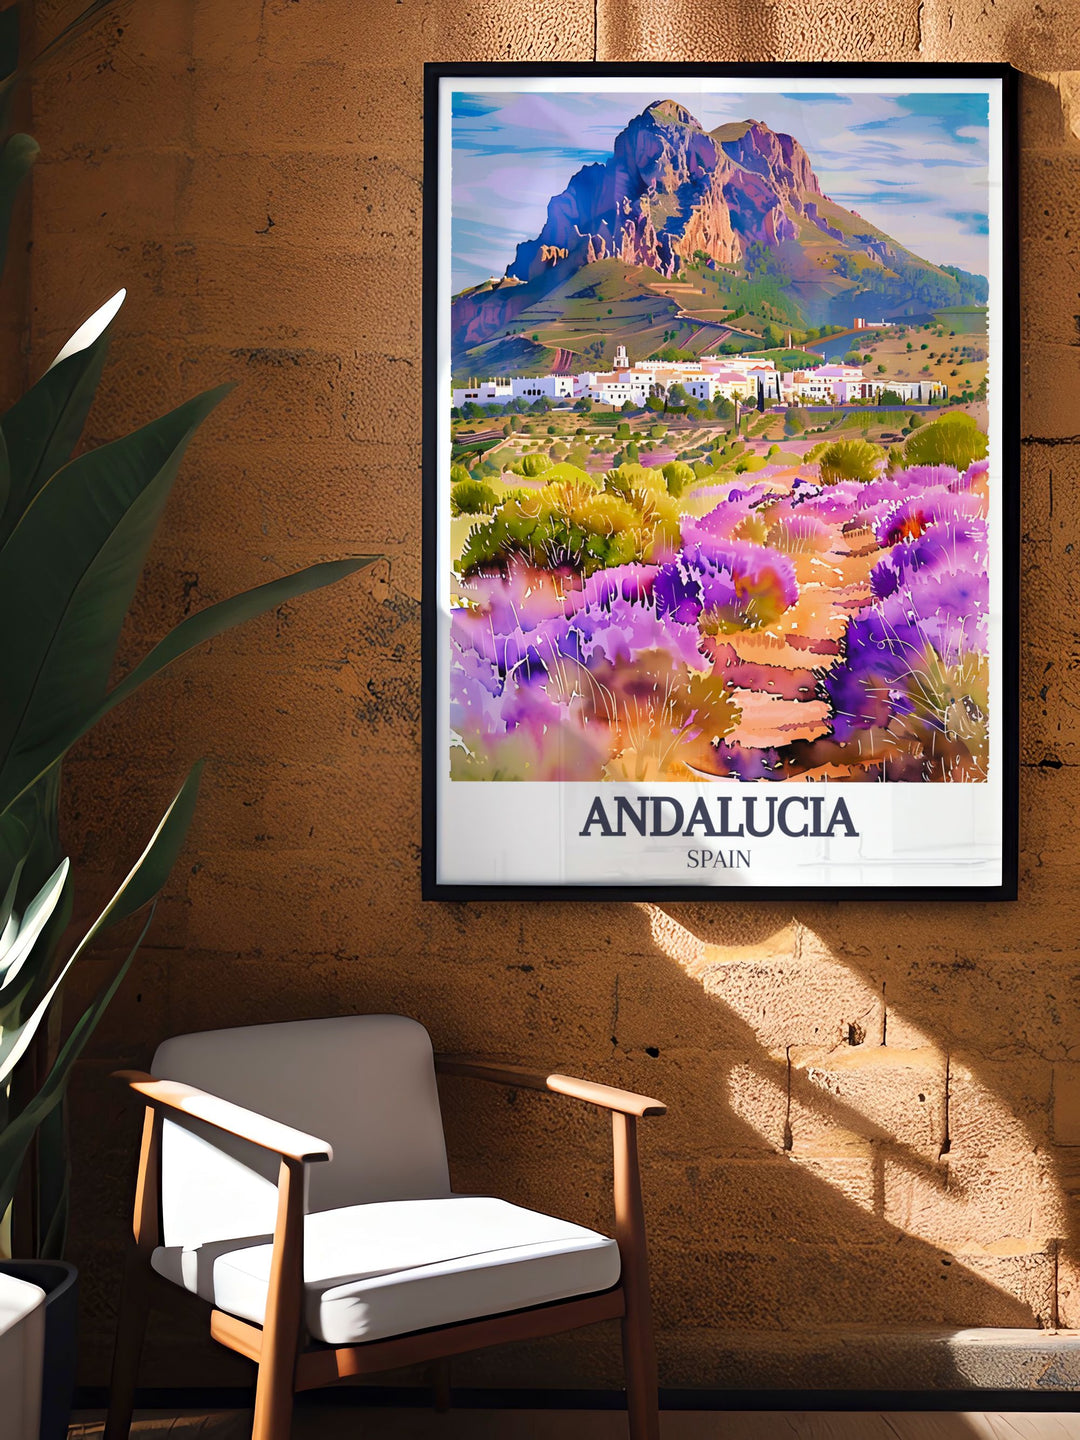 Zahara de la Sierra, nestled in the Andalucia hills, is beautifully depicted in this travel poster. The vibrant colors and detailed scenery bring the charm of Spain into your living space.